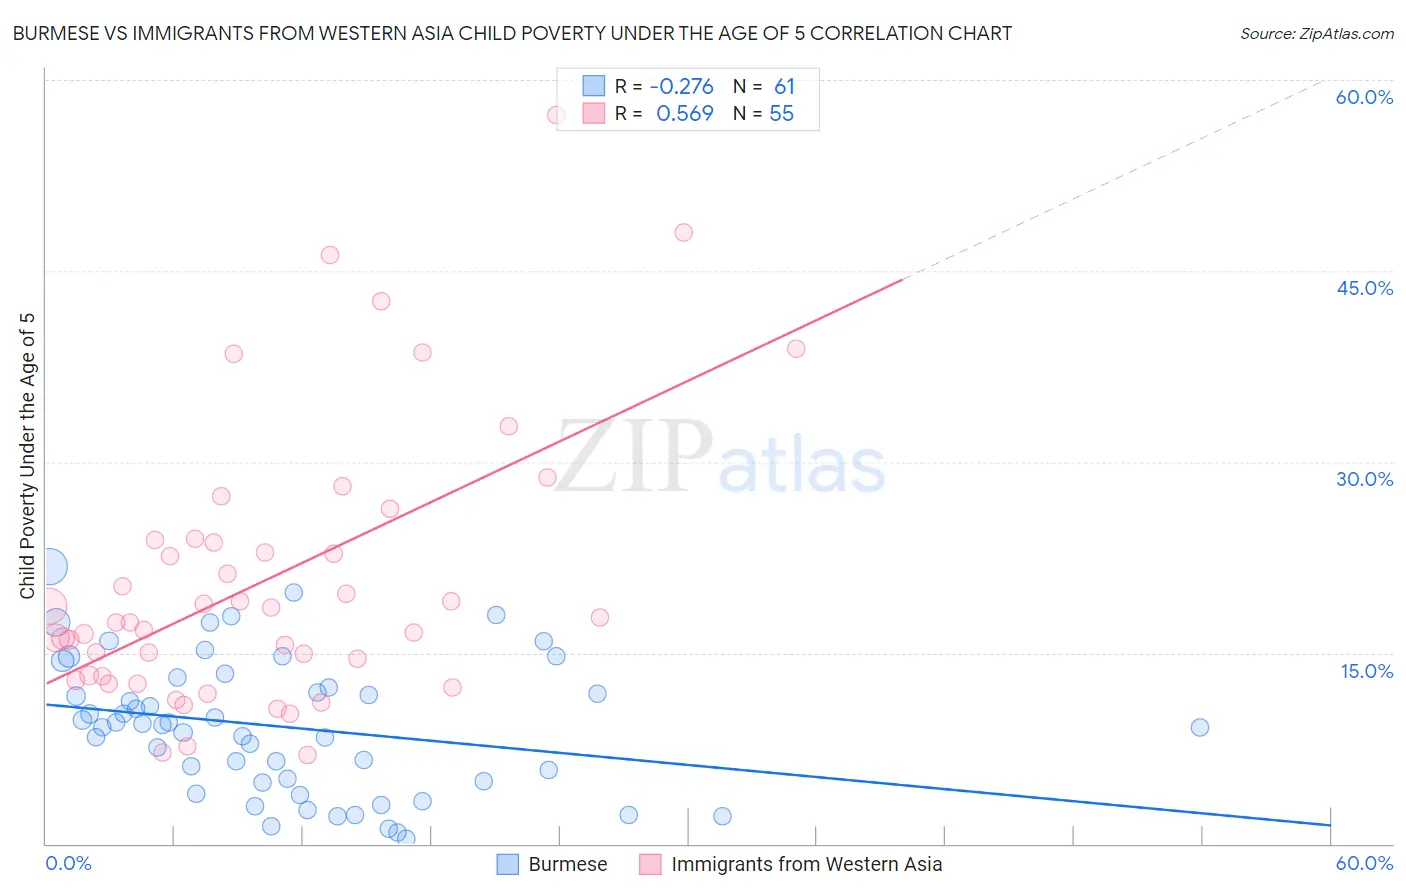 Burmese vs Immigrants from Western Asia Child Poverty Under the Age of 5